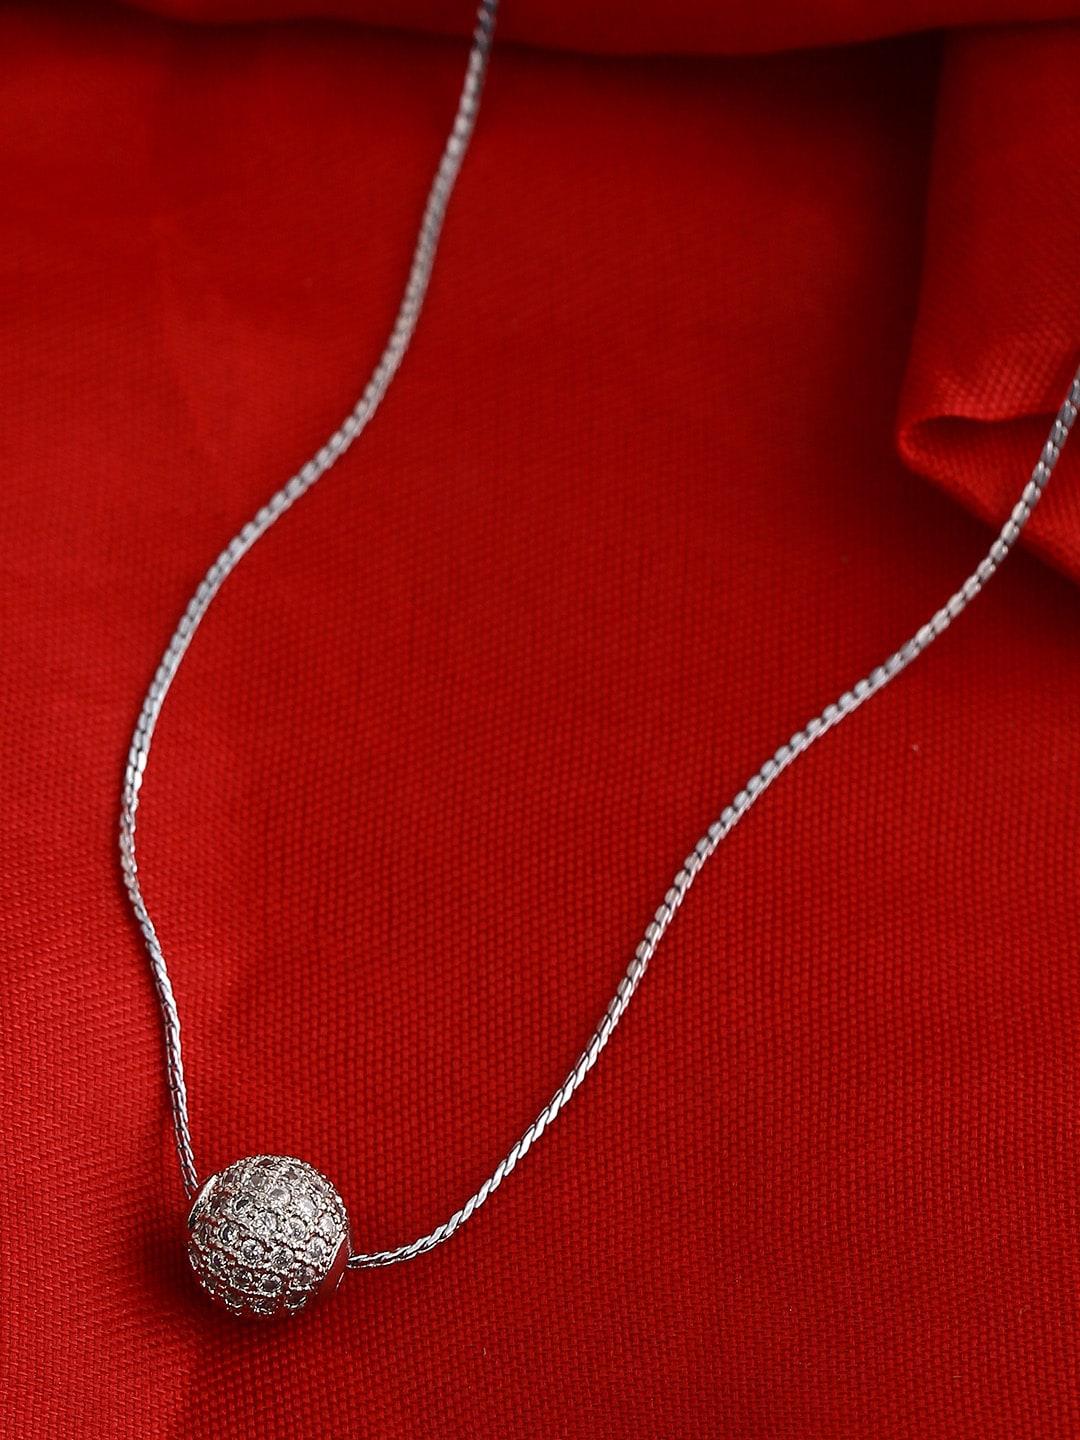 shoshaa women silver-plated ball pendant with chain